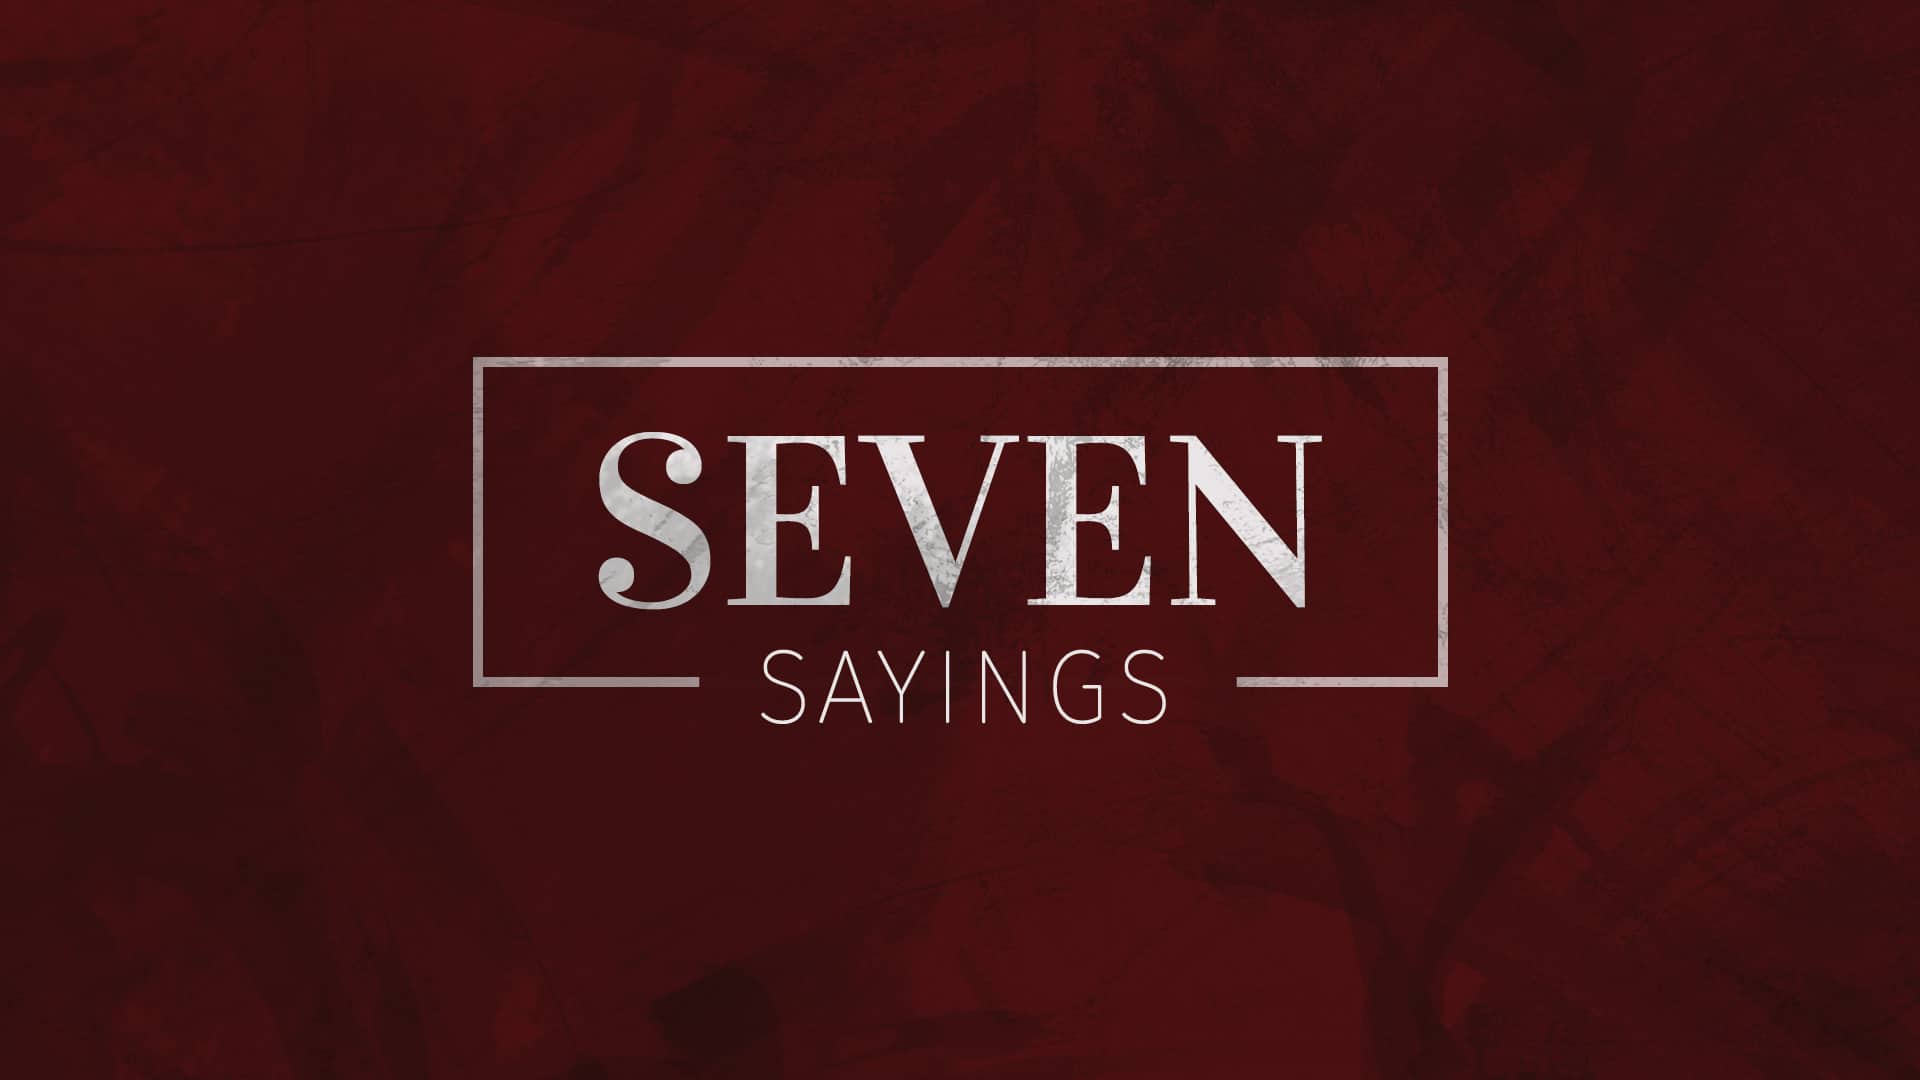 Featured image for “Seven Sayings”